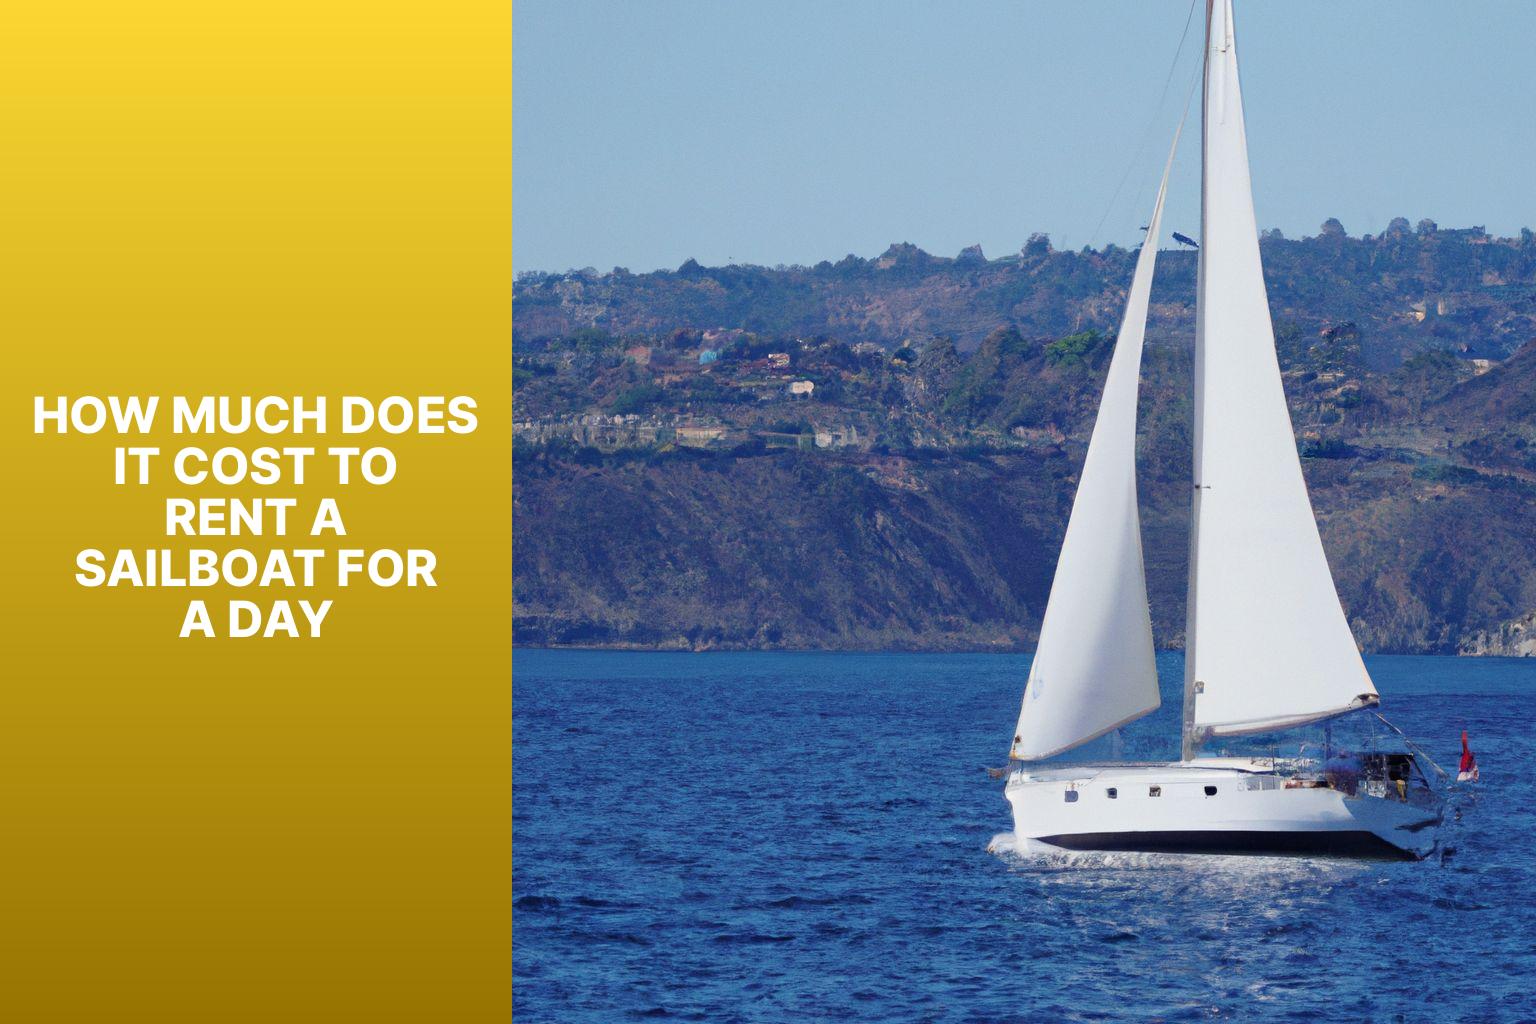 Affordable Sailboat Rentals: Cost to Rent a Sailboat for a Day Explained